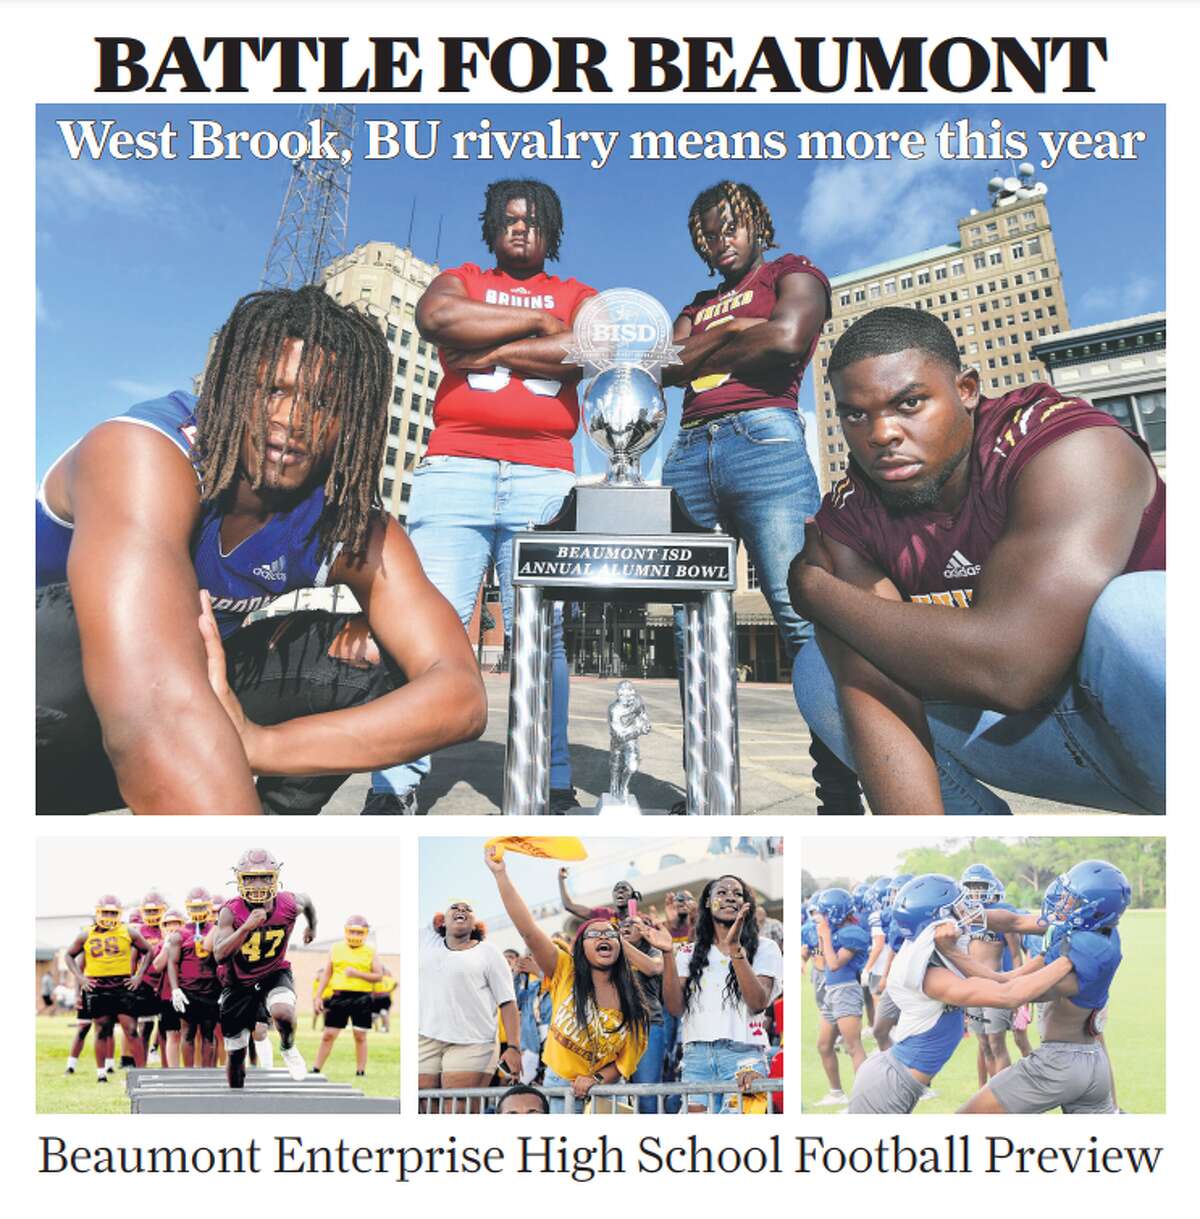 Here's what to expect from this year's Beaumont Enterprise High School Football Preview.